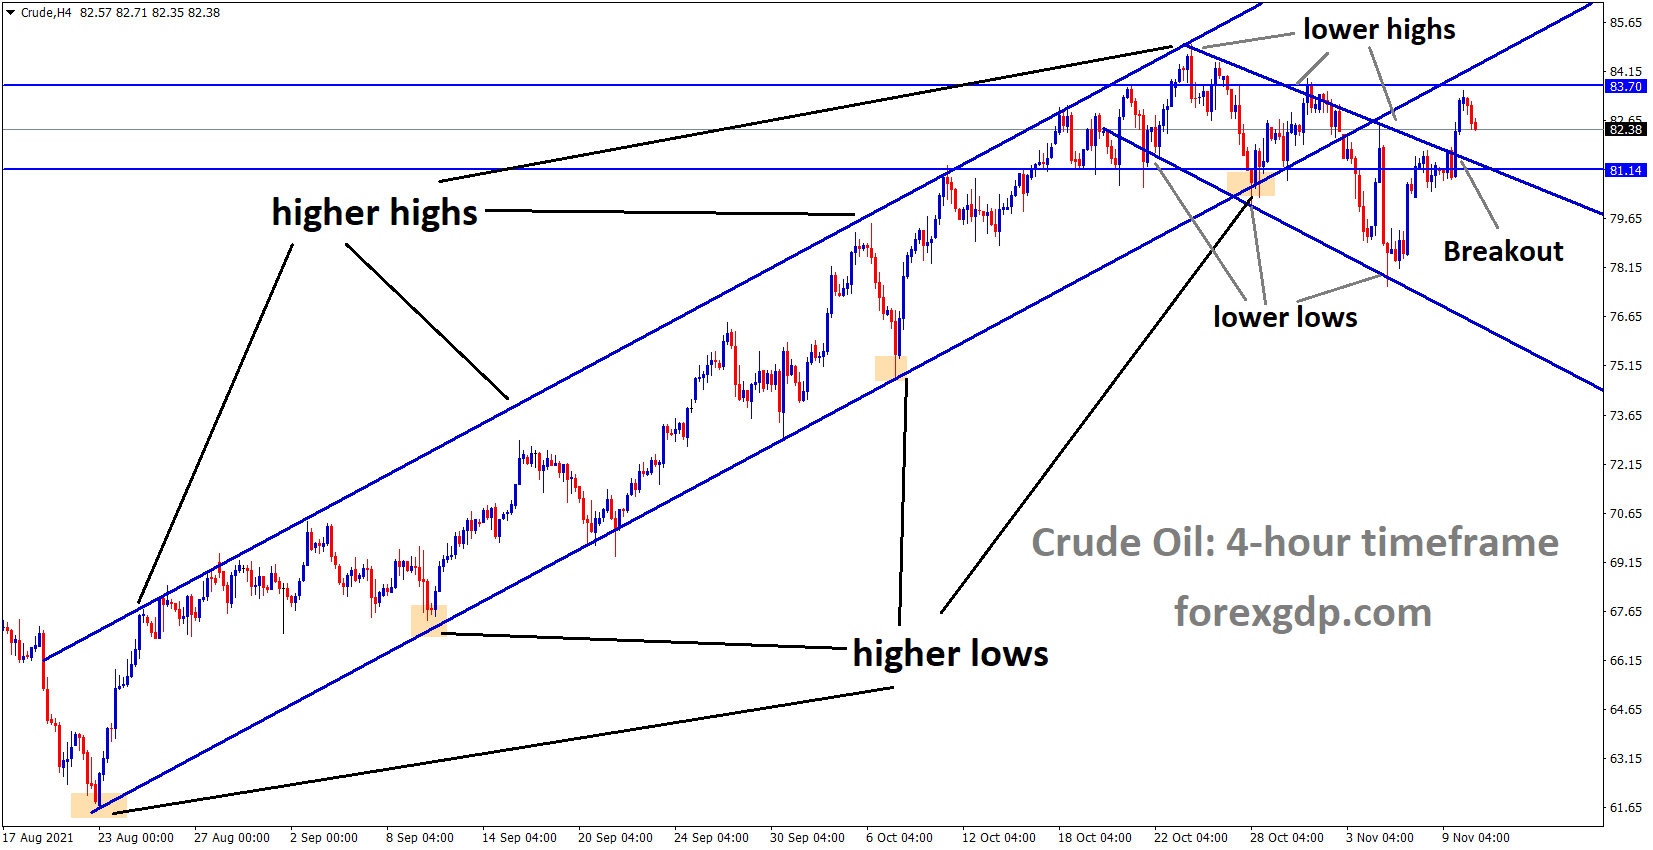 Crude oil has broken the minor descending channel and fallen from the previous resistance area.